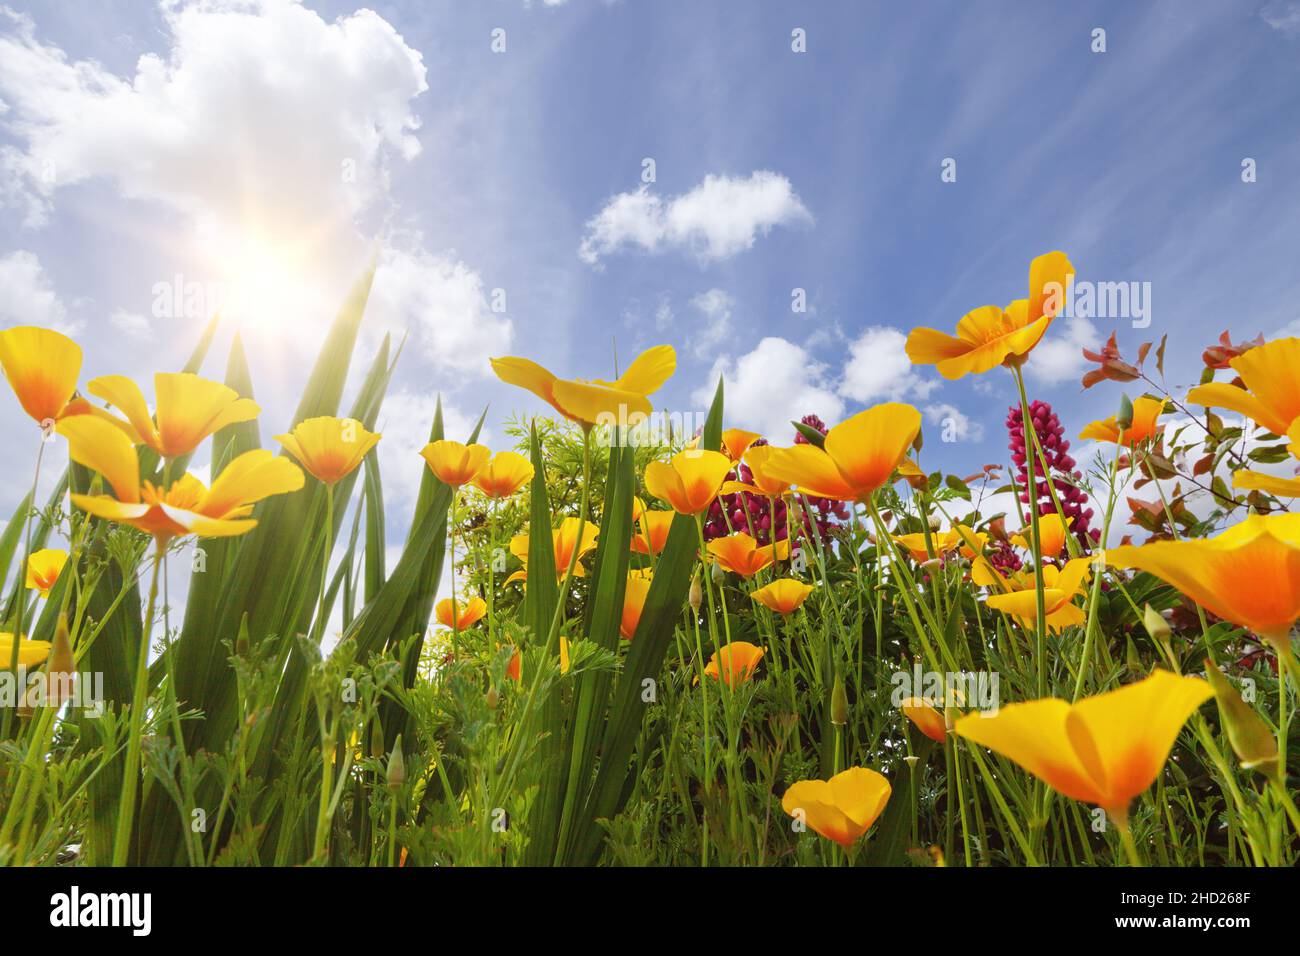 Spring garden flowers yellow poppies looking up towards a fresh blue sky and beautiful sunshine Stock Photo